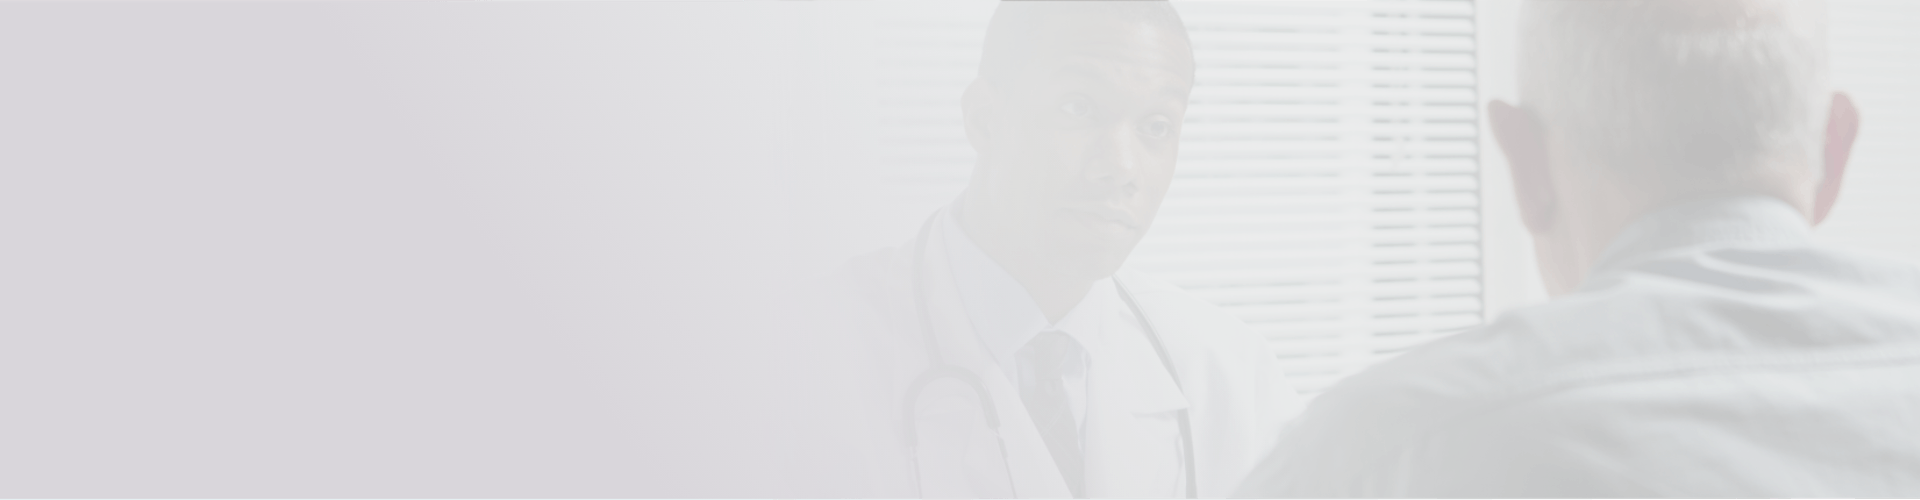 Background image of doctor talking to patient